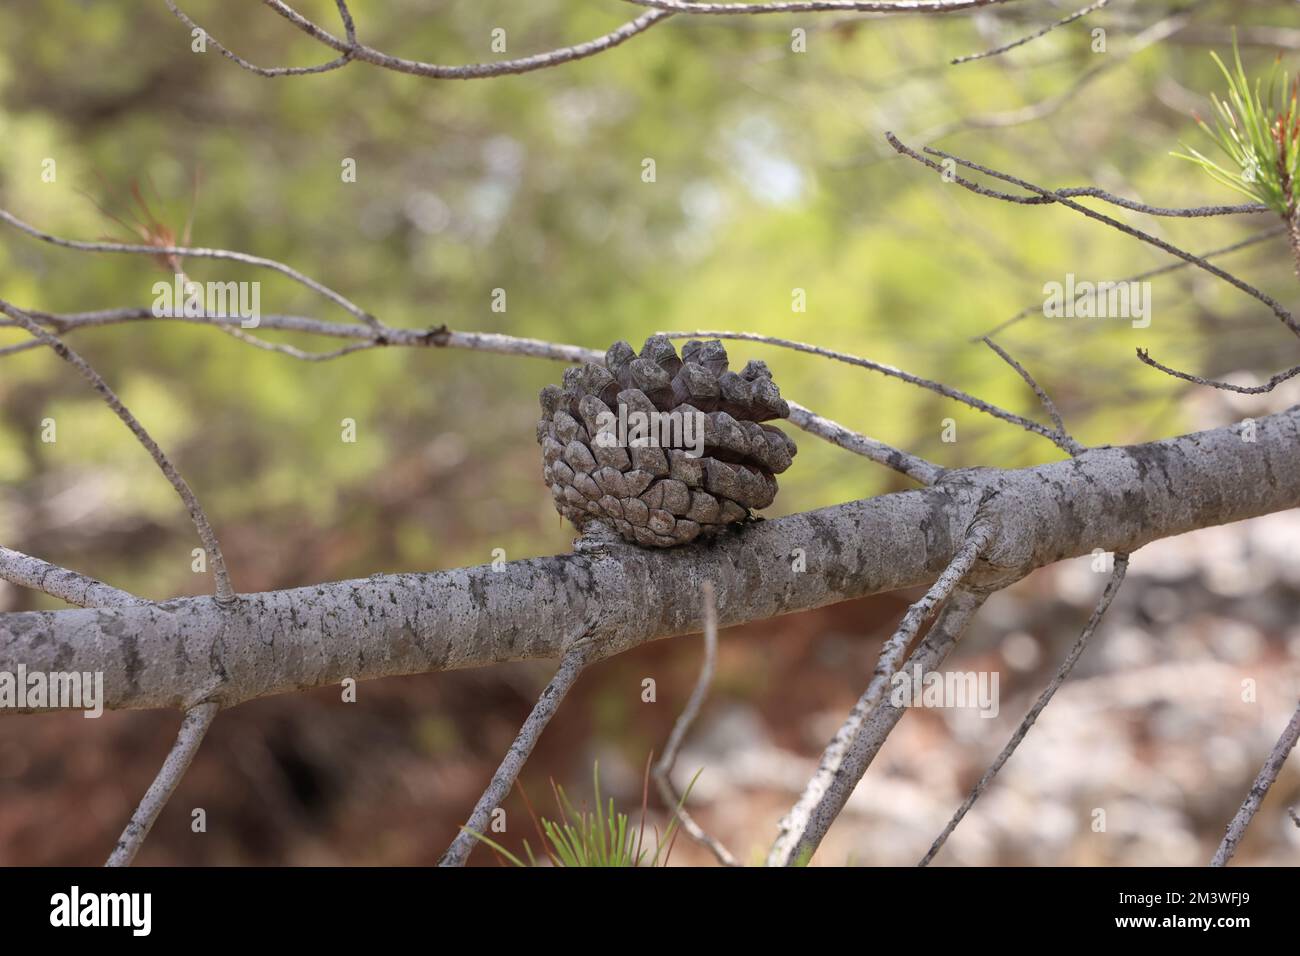 A selective of a pine branch with needles and old cones Stock Photo